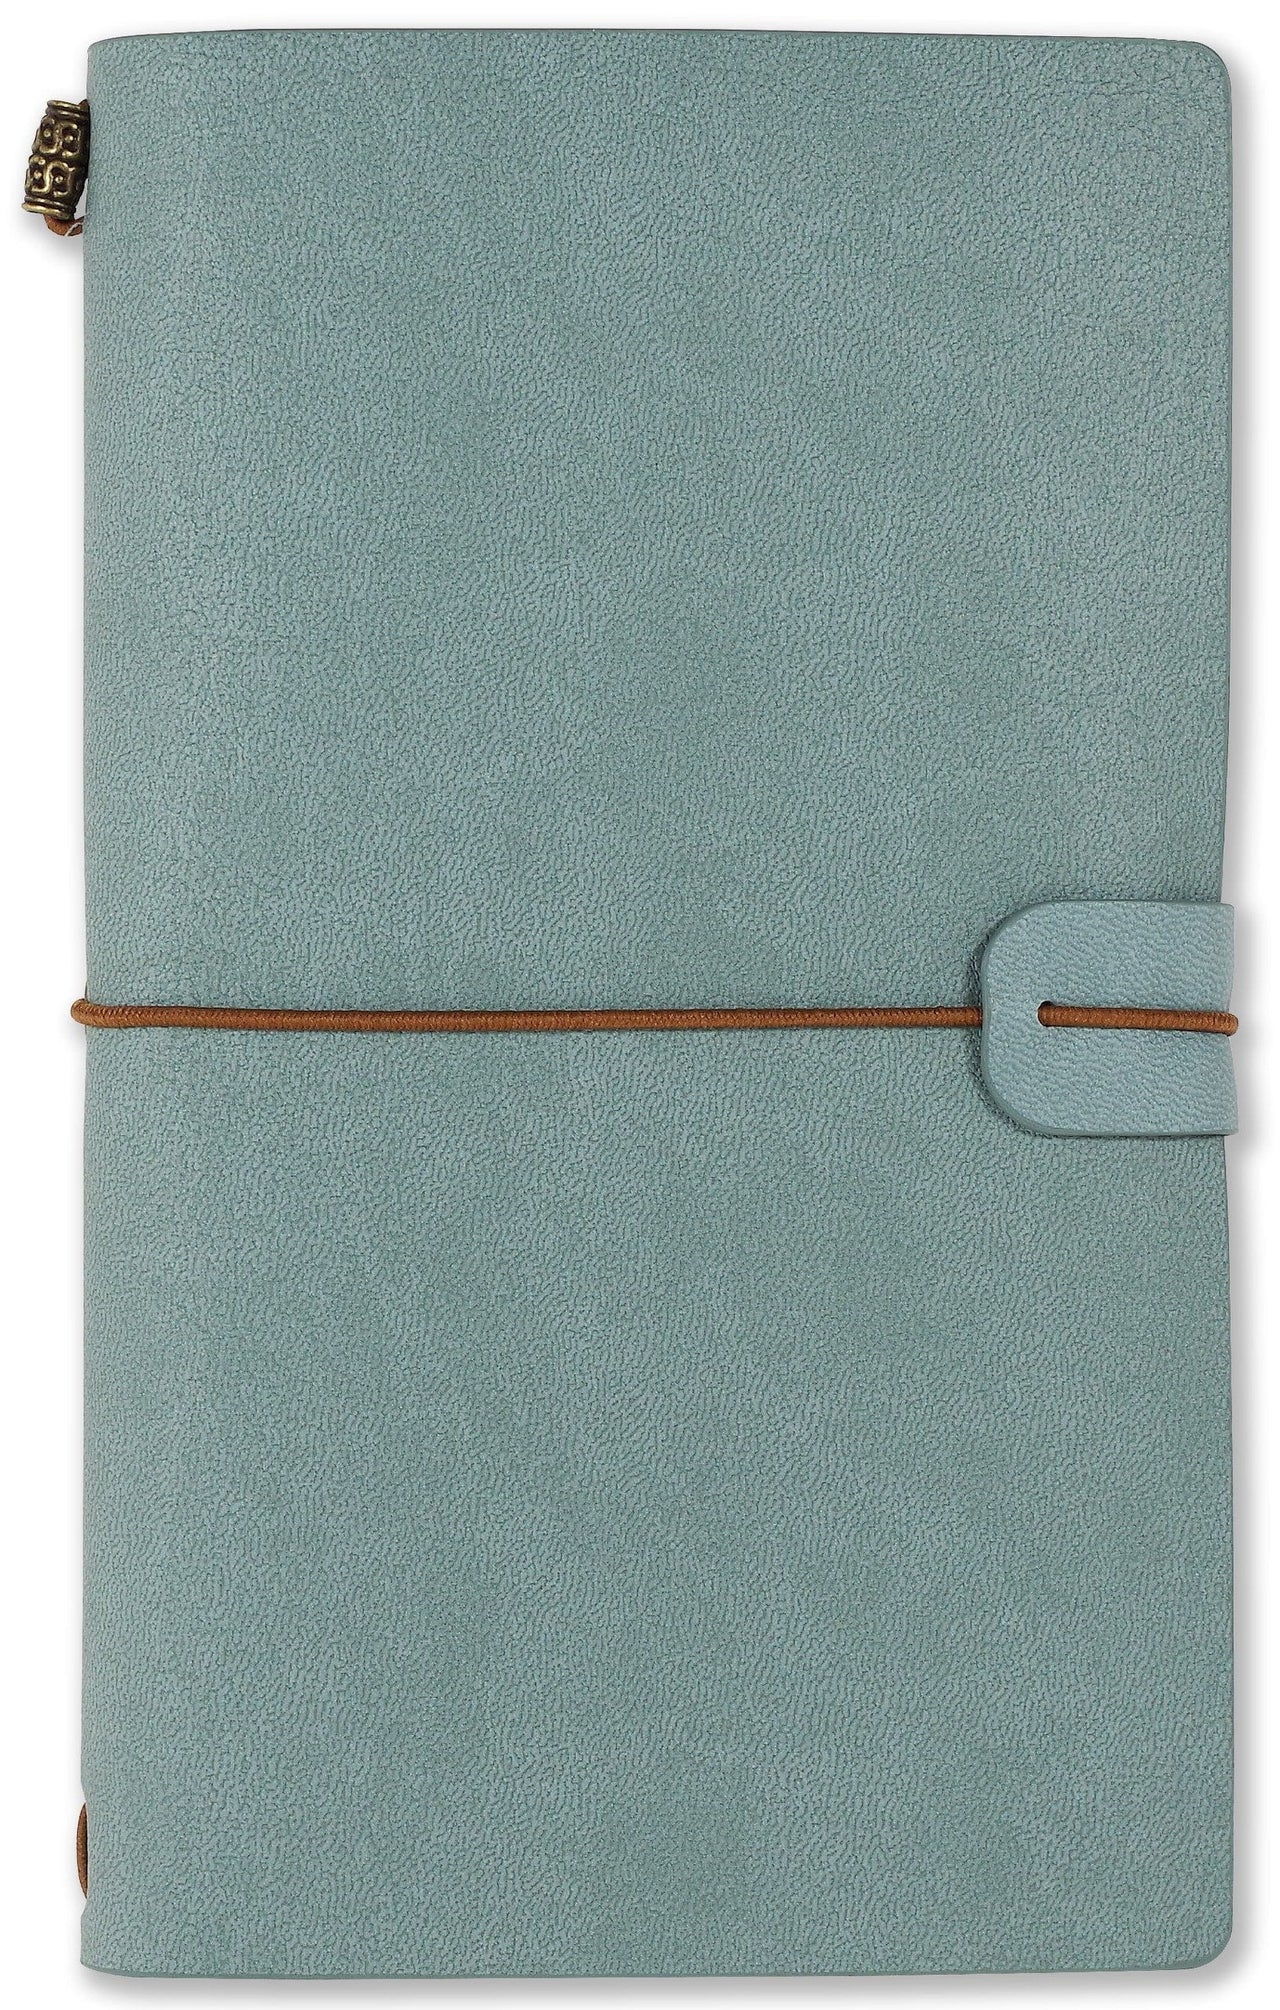 Voyager Journal Lined Paper Refill (2-Pack)